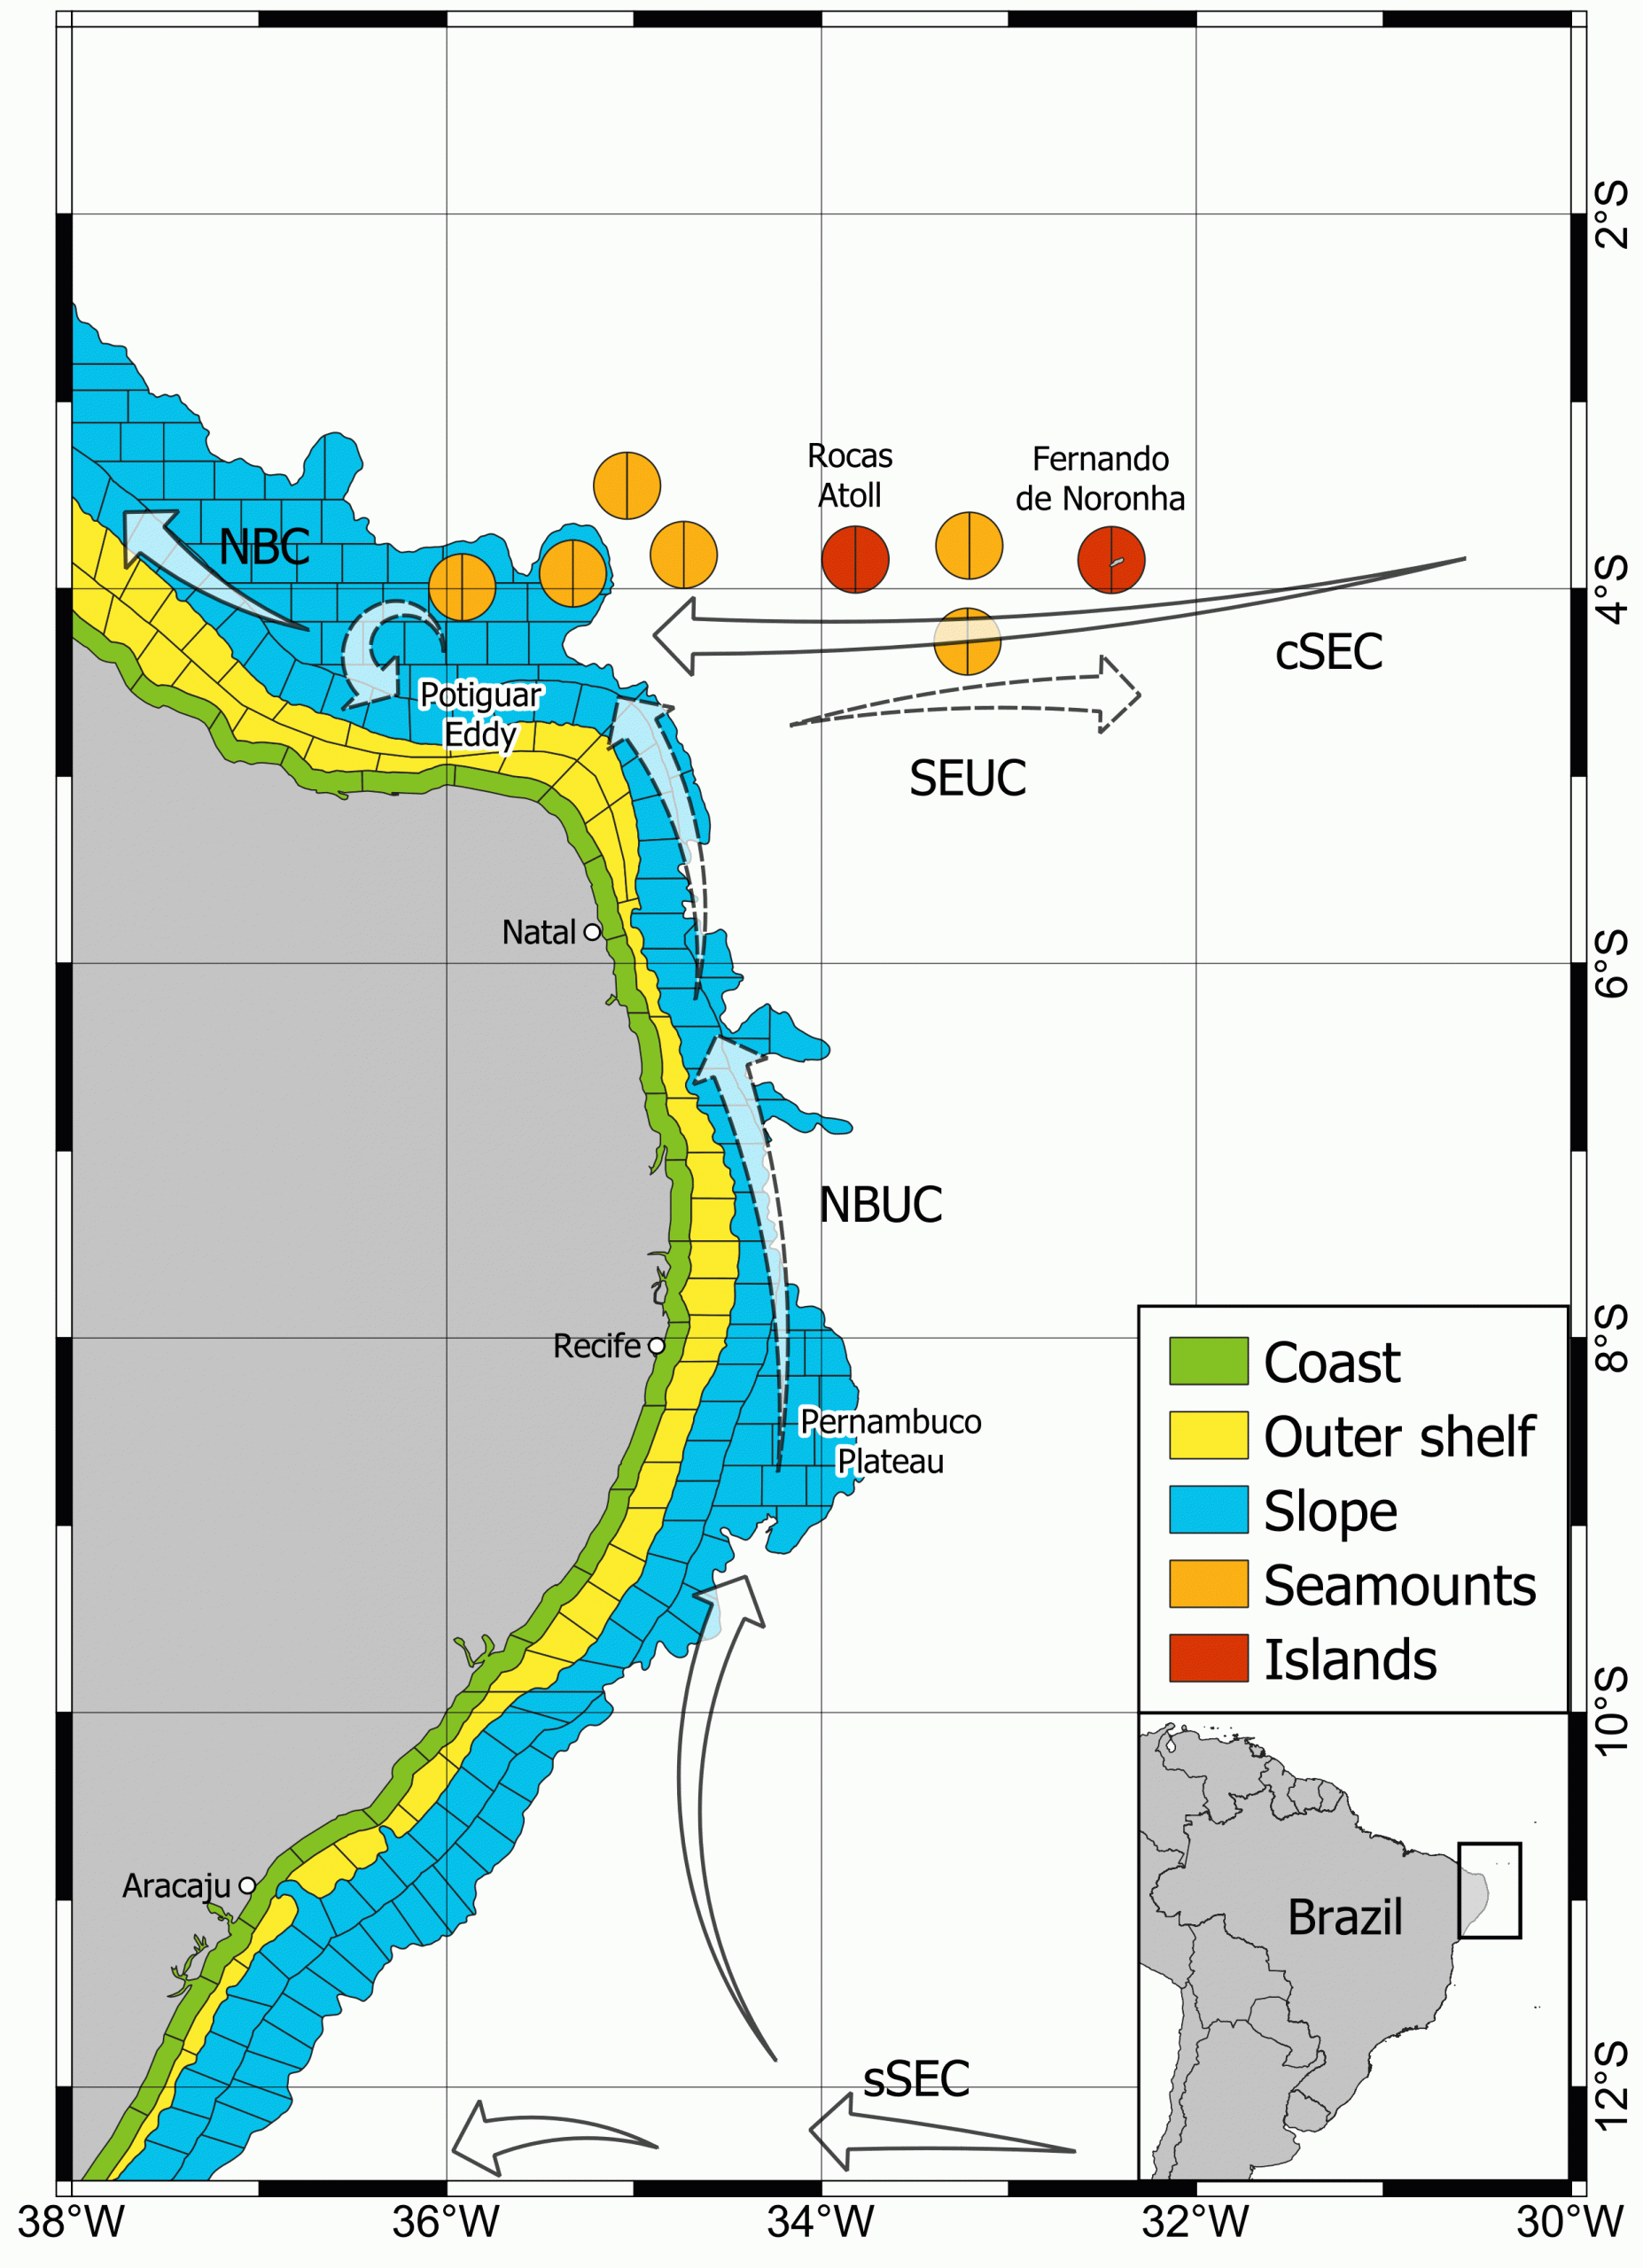 Processed outputs from a community based Lagrangian dispersal simulation in the Tropical Southwestern Atlantic